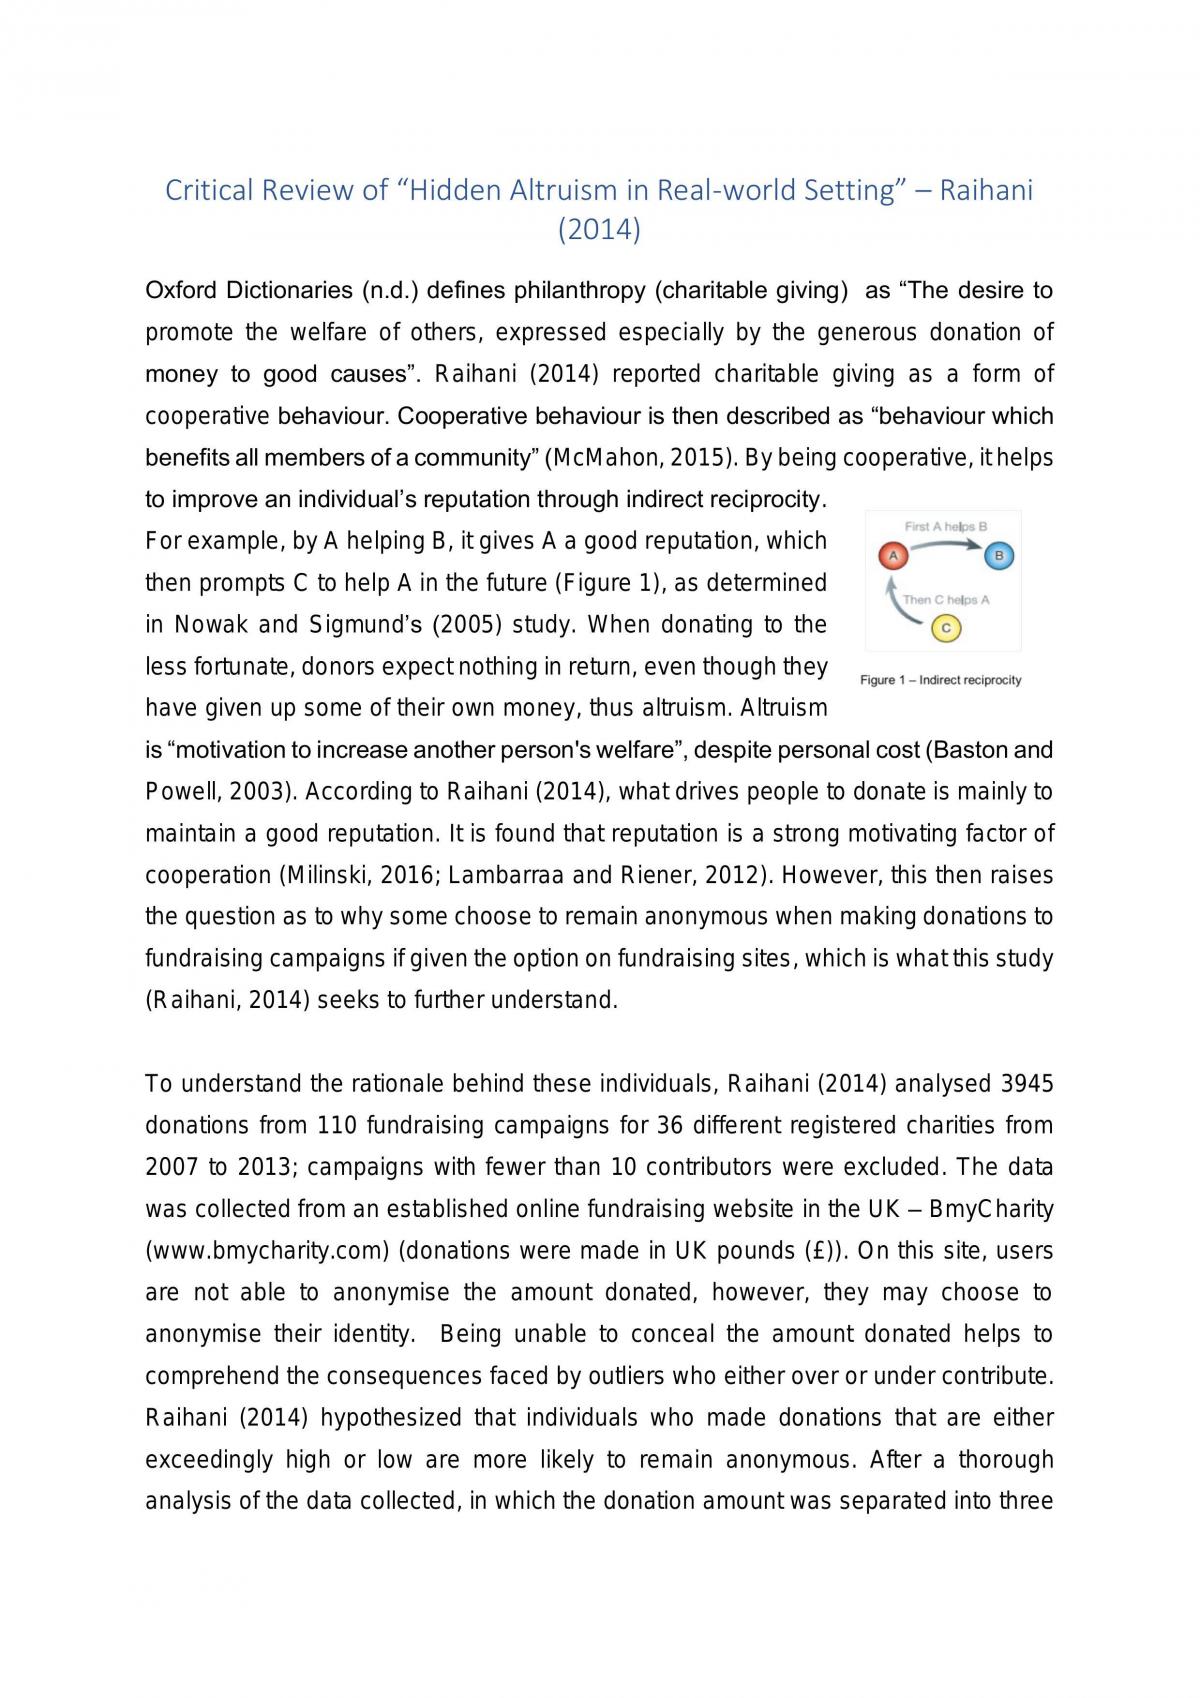 Critical Review of “Hidden Altruism in Real-world Setting” – Raihani (2014) - Page 1